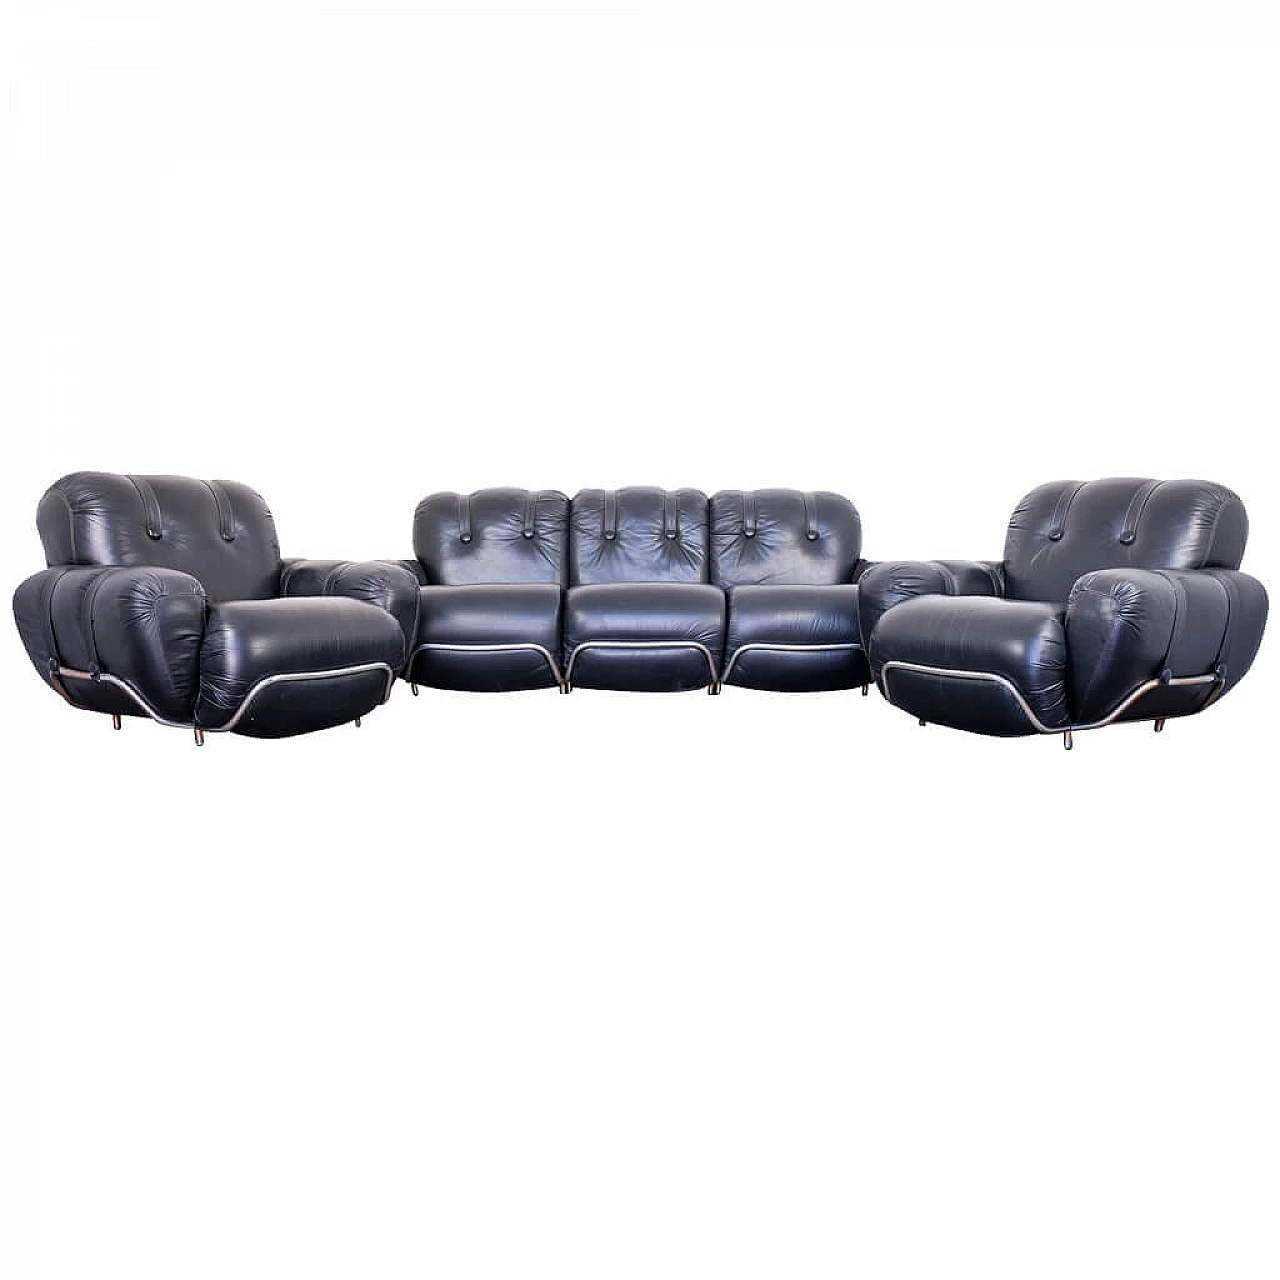 Sofa and armchairs set in leather and steel, 70s 1212370